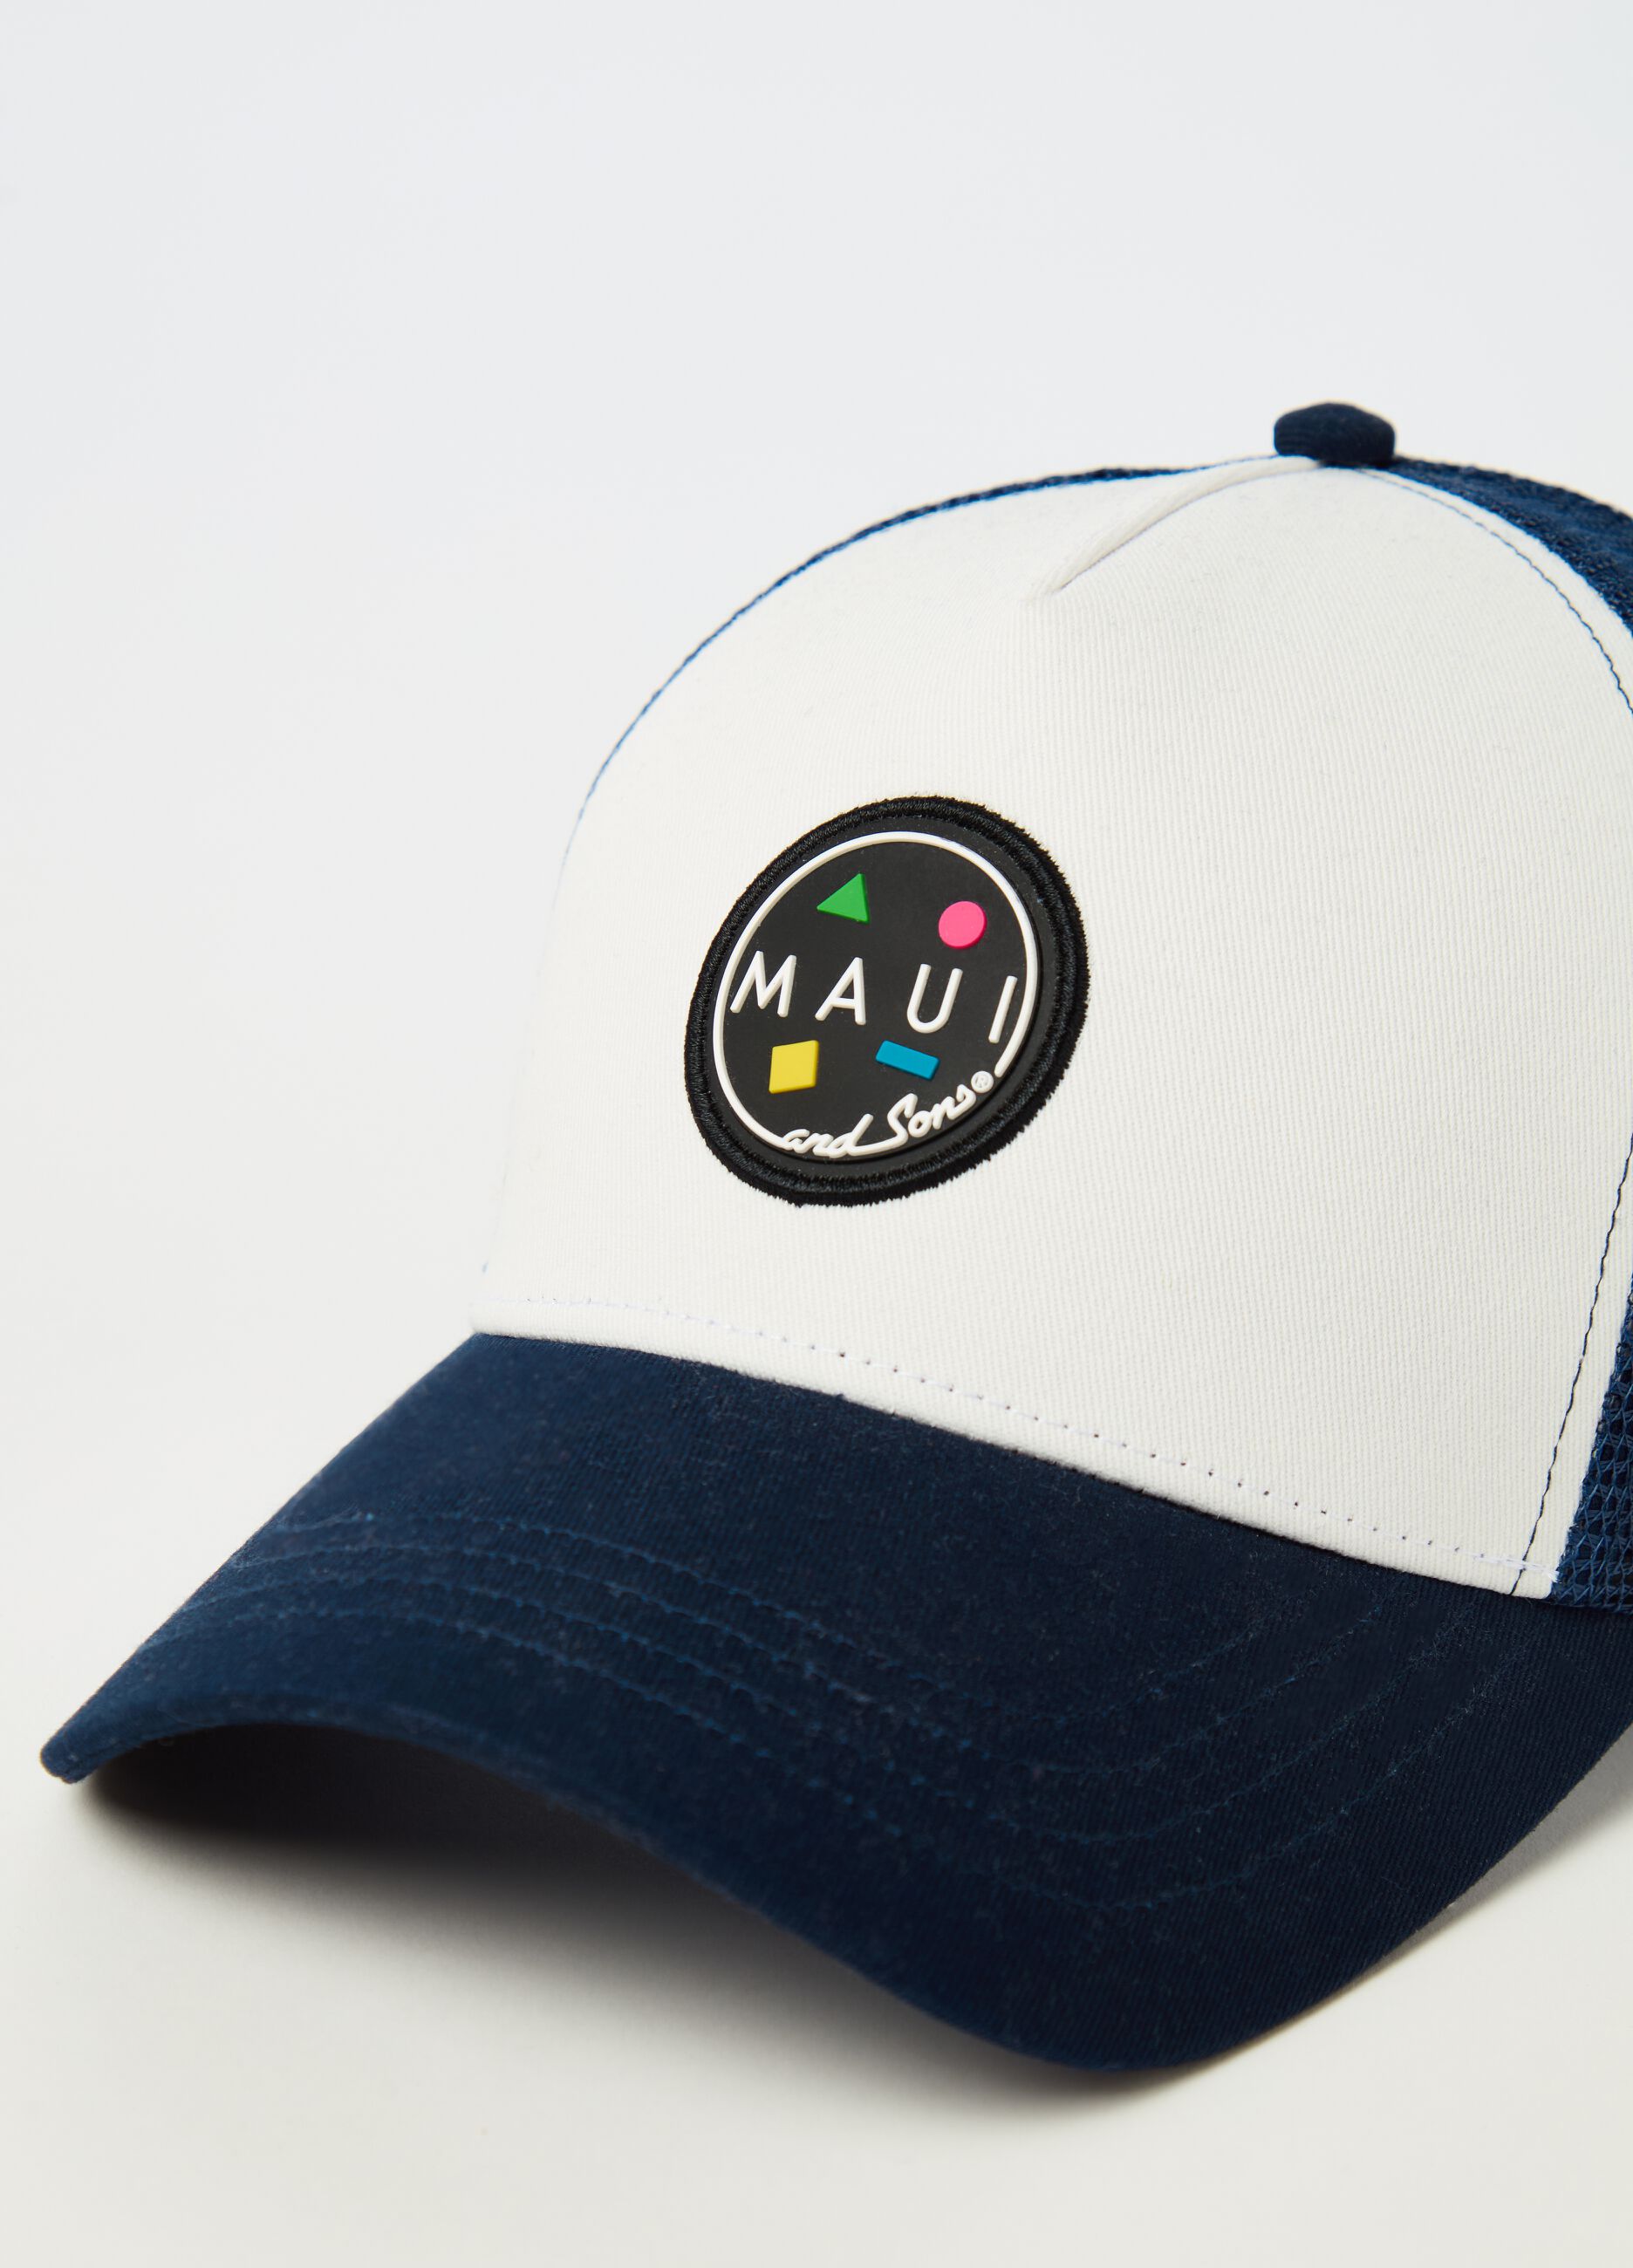 Baseball cap with patch with logo